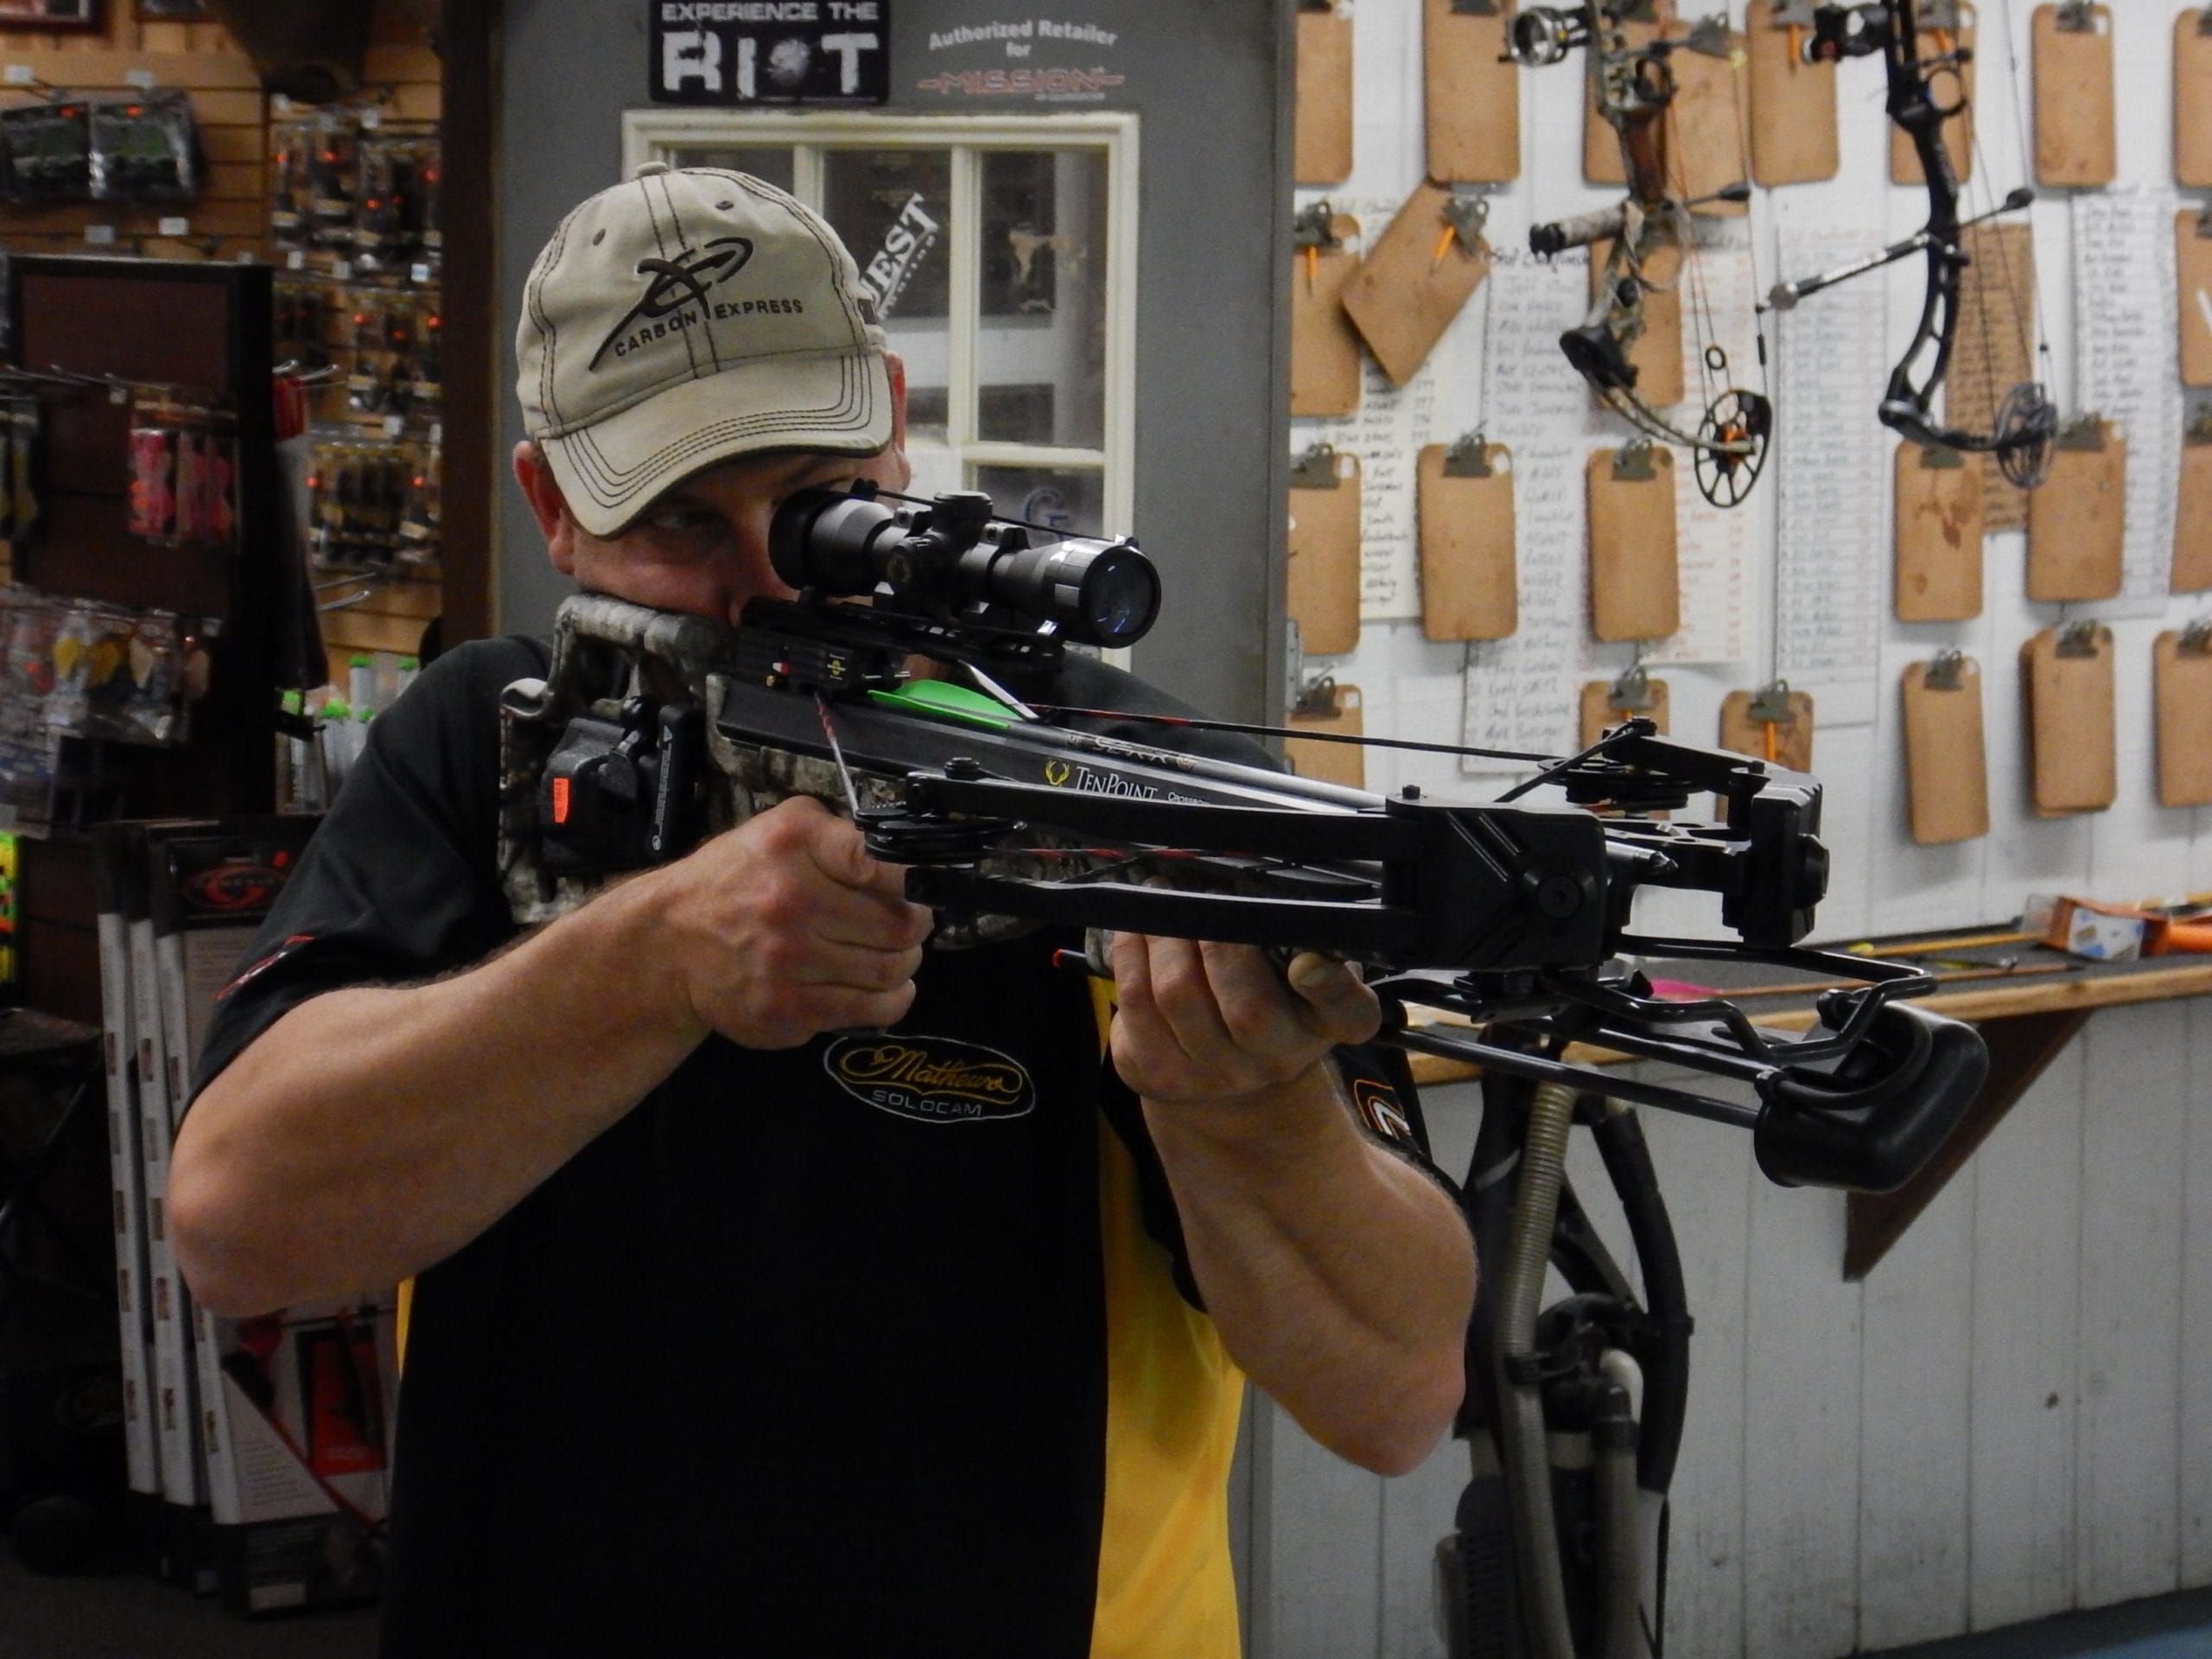 Mark Kruizenga advises that although crossbows have a shorter learning curve than traditional bows for shooting accurately, hunters make a big mistake if they don’t practice with their crossbows before taking them afield.